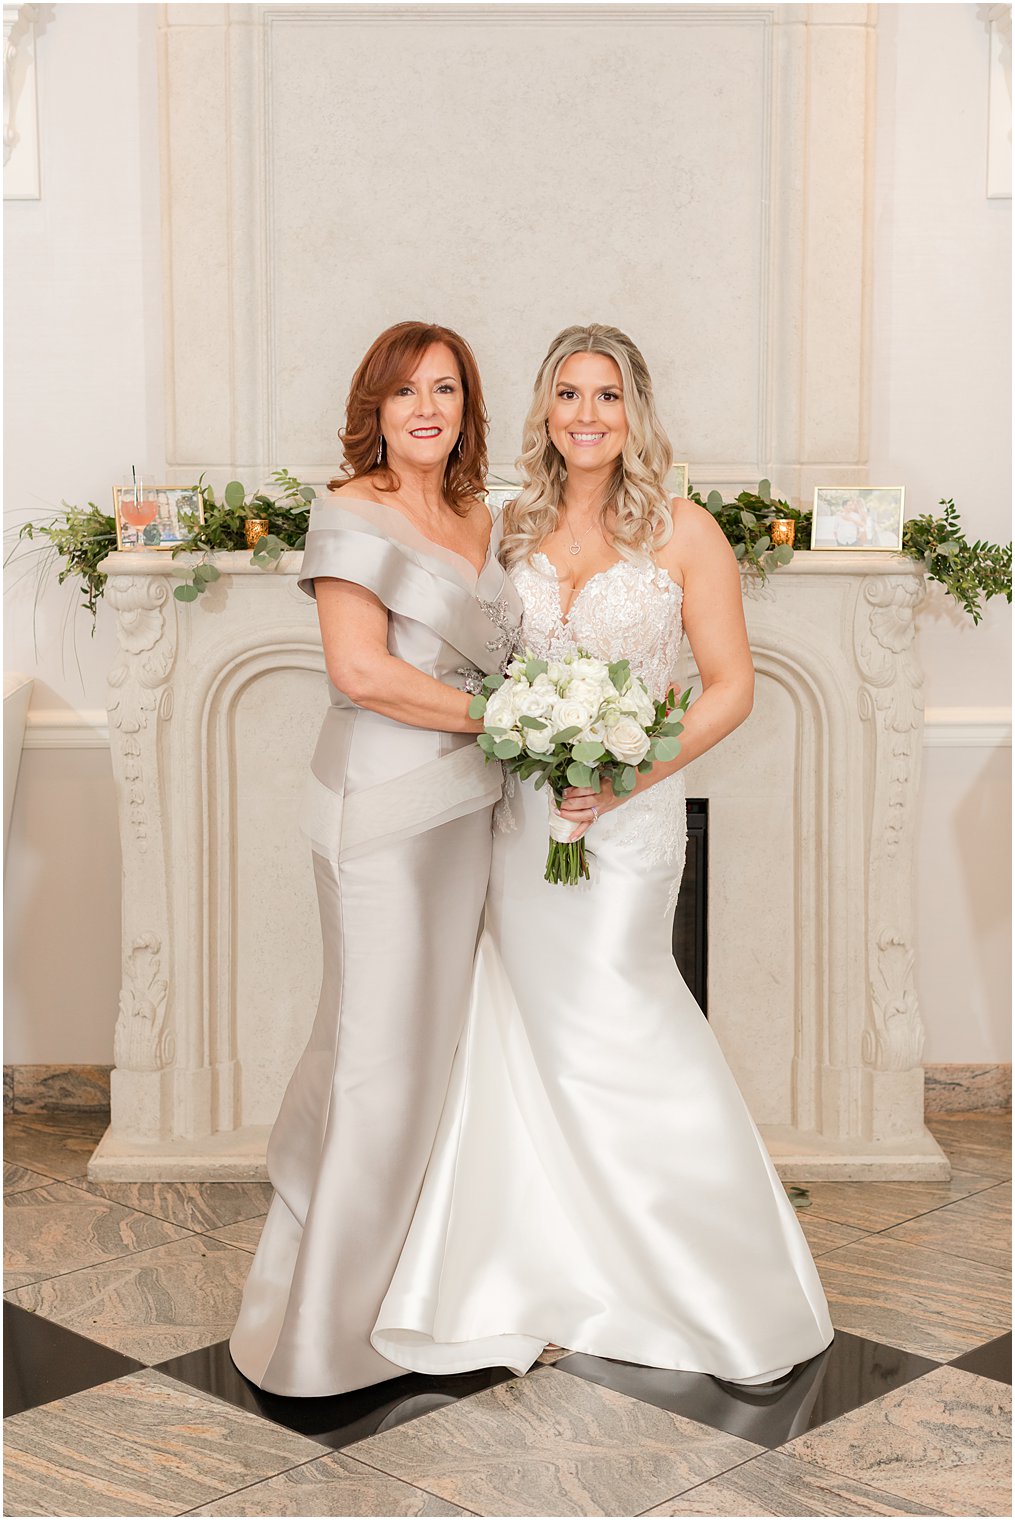 Tips to include moms in wedding photos: Family formals